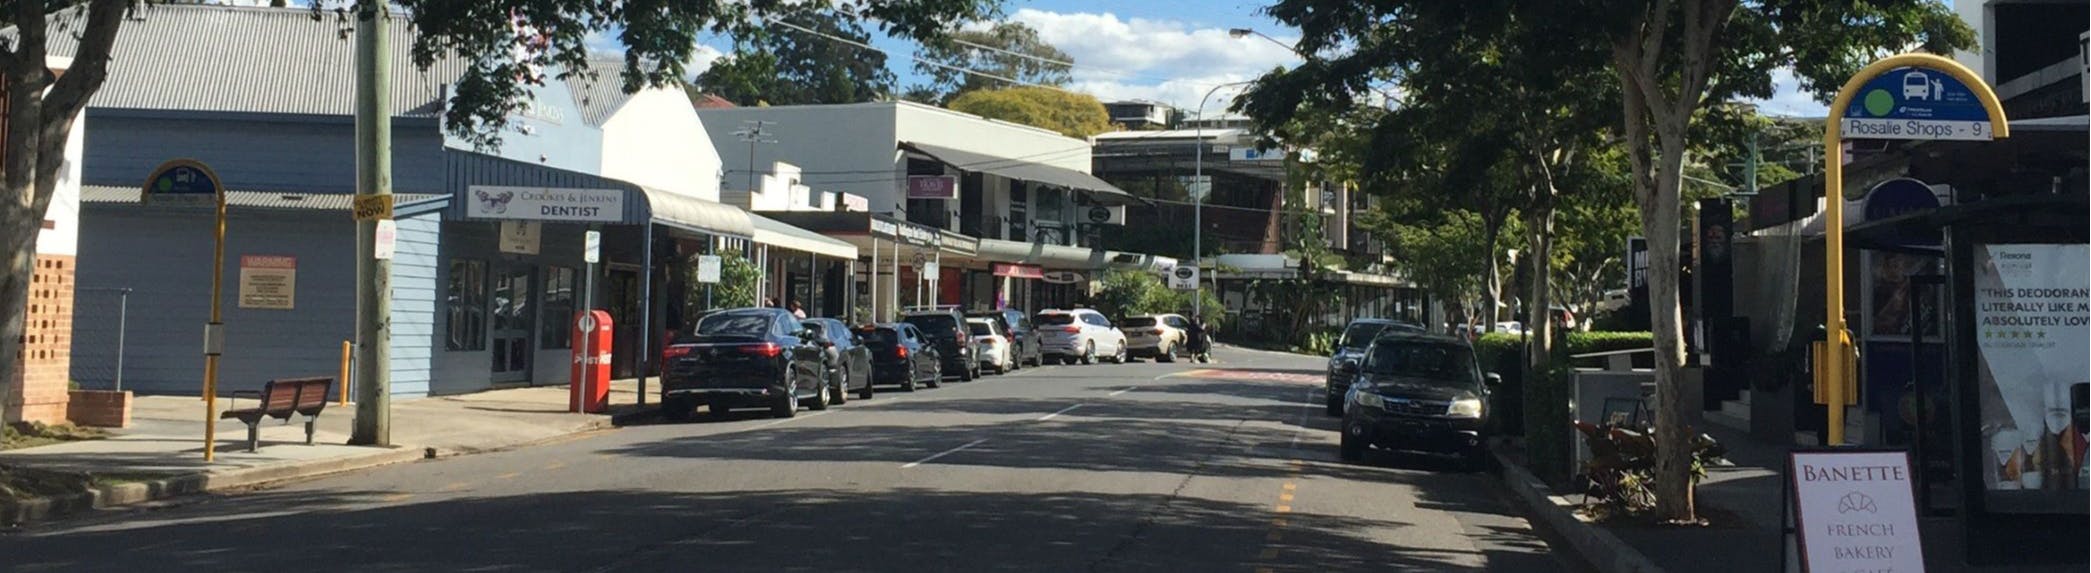 Shops and businesses along Baroona Road from the eastern entry.